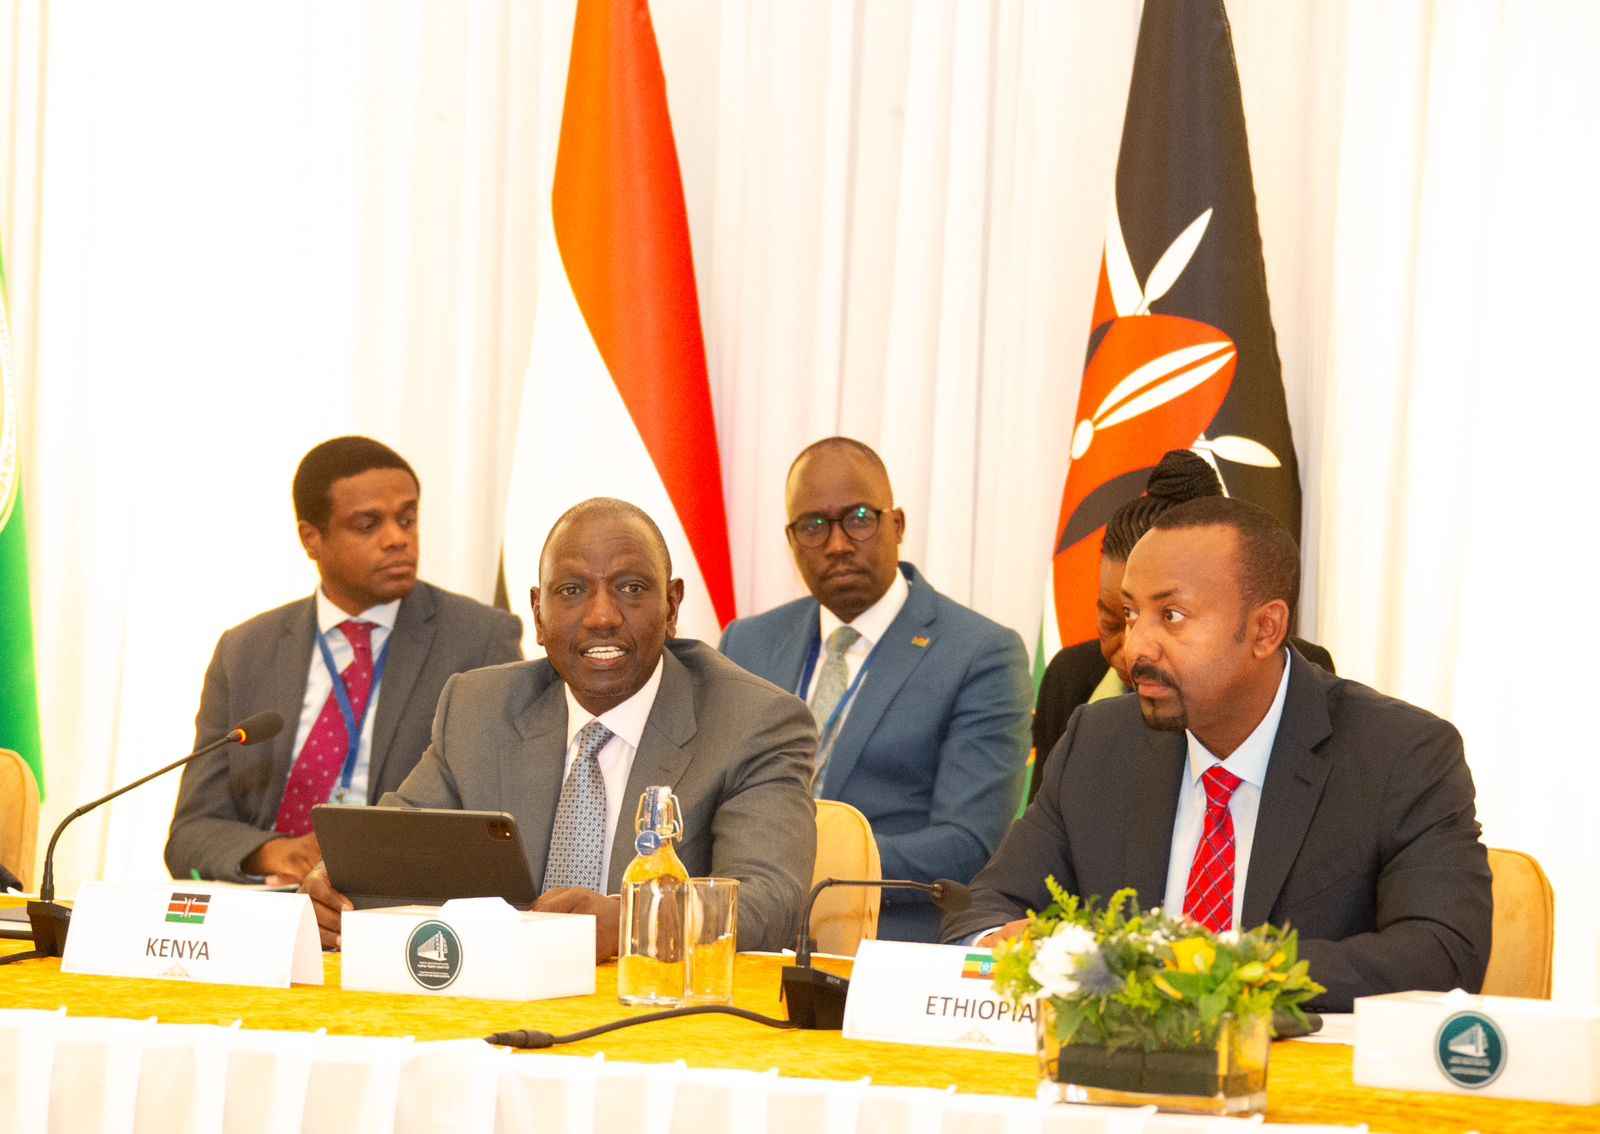 President William Ruto and Ethiopian Prime Minister Abiy Ahmed in Addis Ababa during the IGAD Quartet Heads of State and Government meeting.